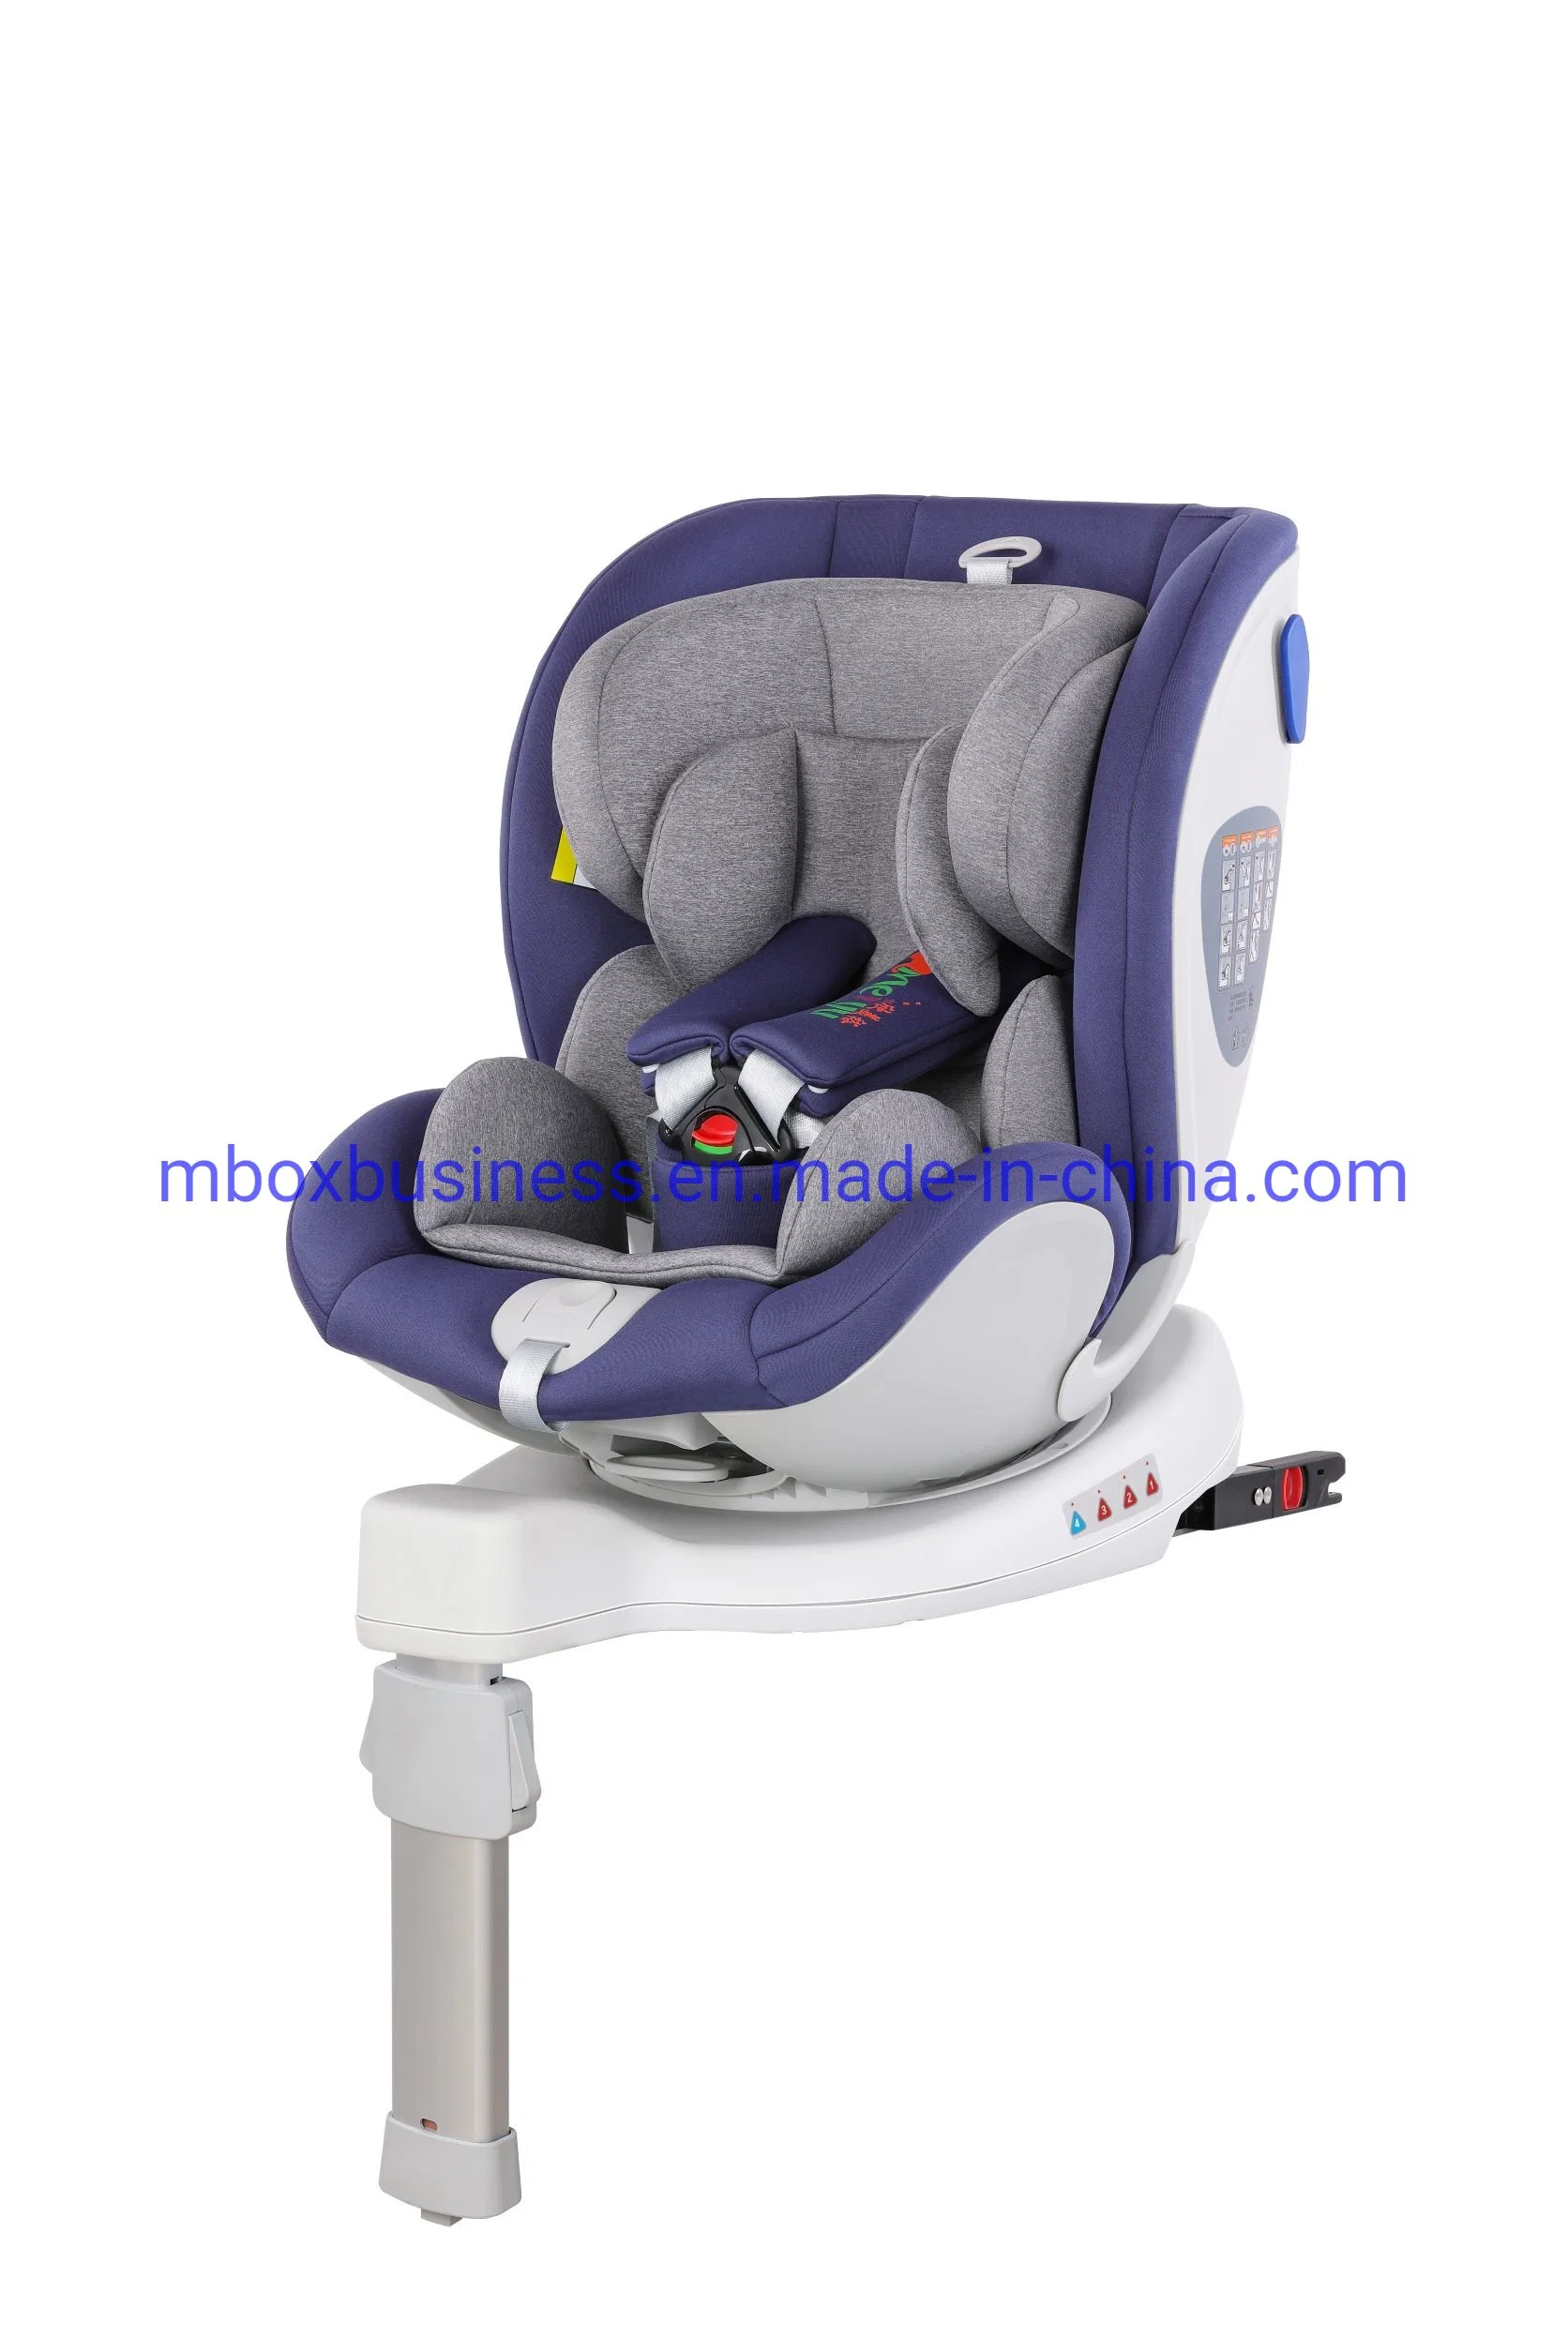 Wholesale/Supplier 360 Degree Rotatable Isofix Children Safety Seat Baby Car Safety Seat Manufacturer